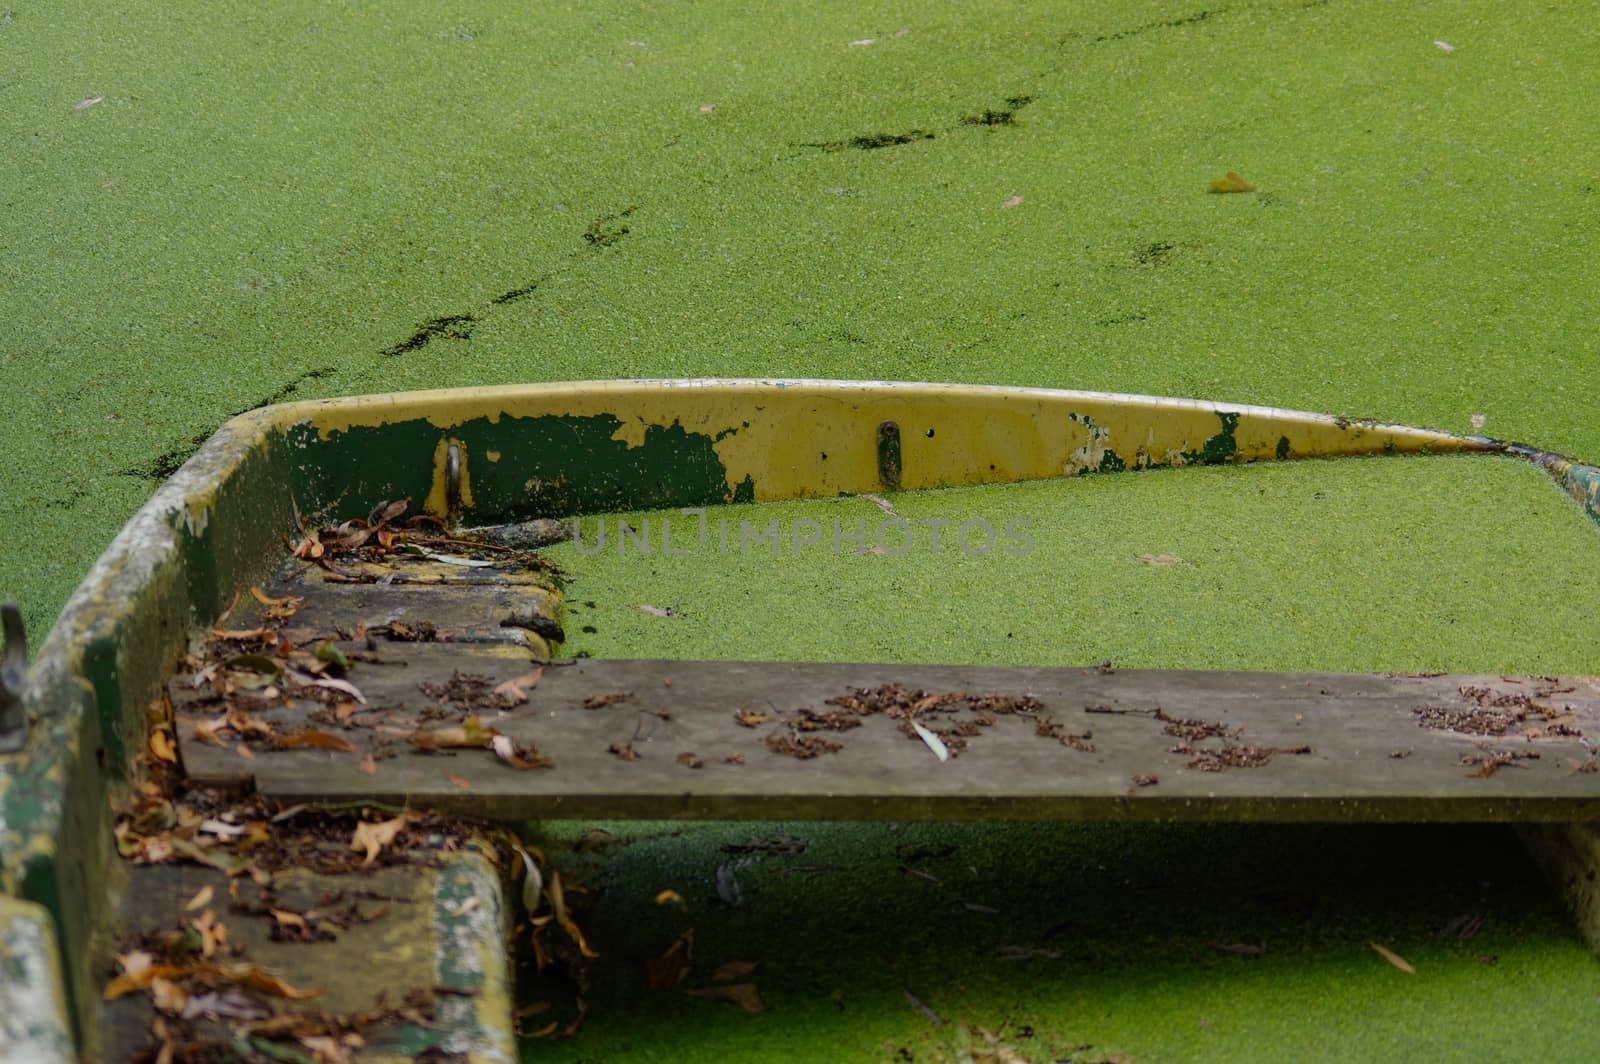 Partially sunken moored iron rowboat with leaves. by evolutionnow